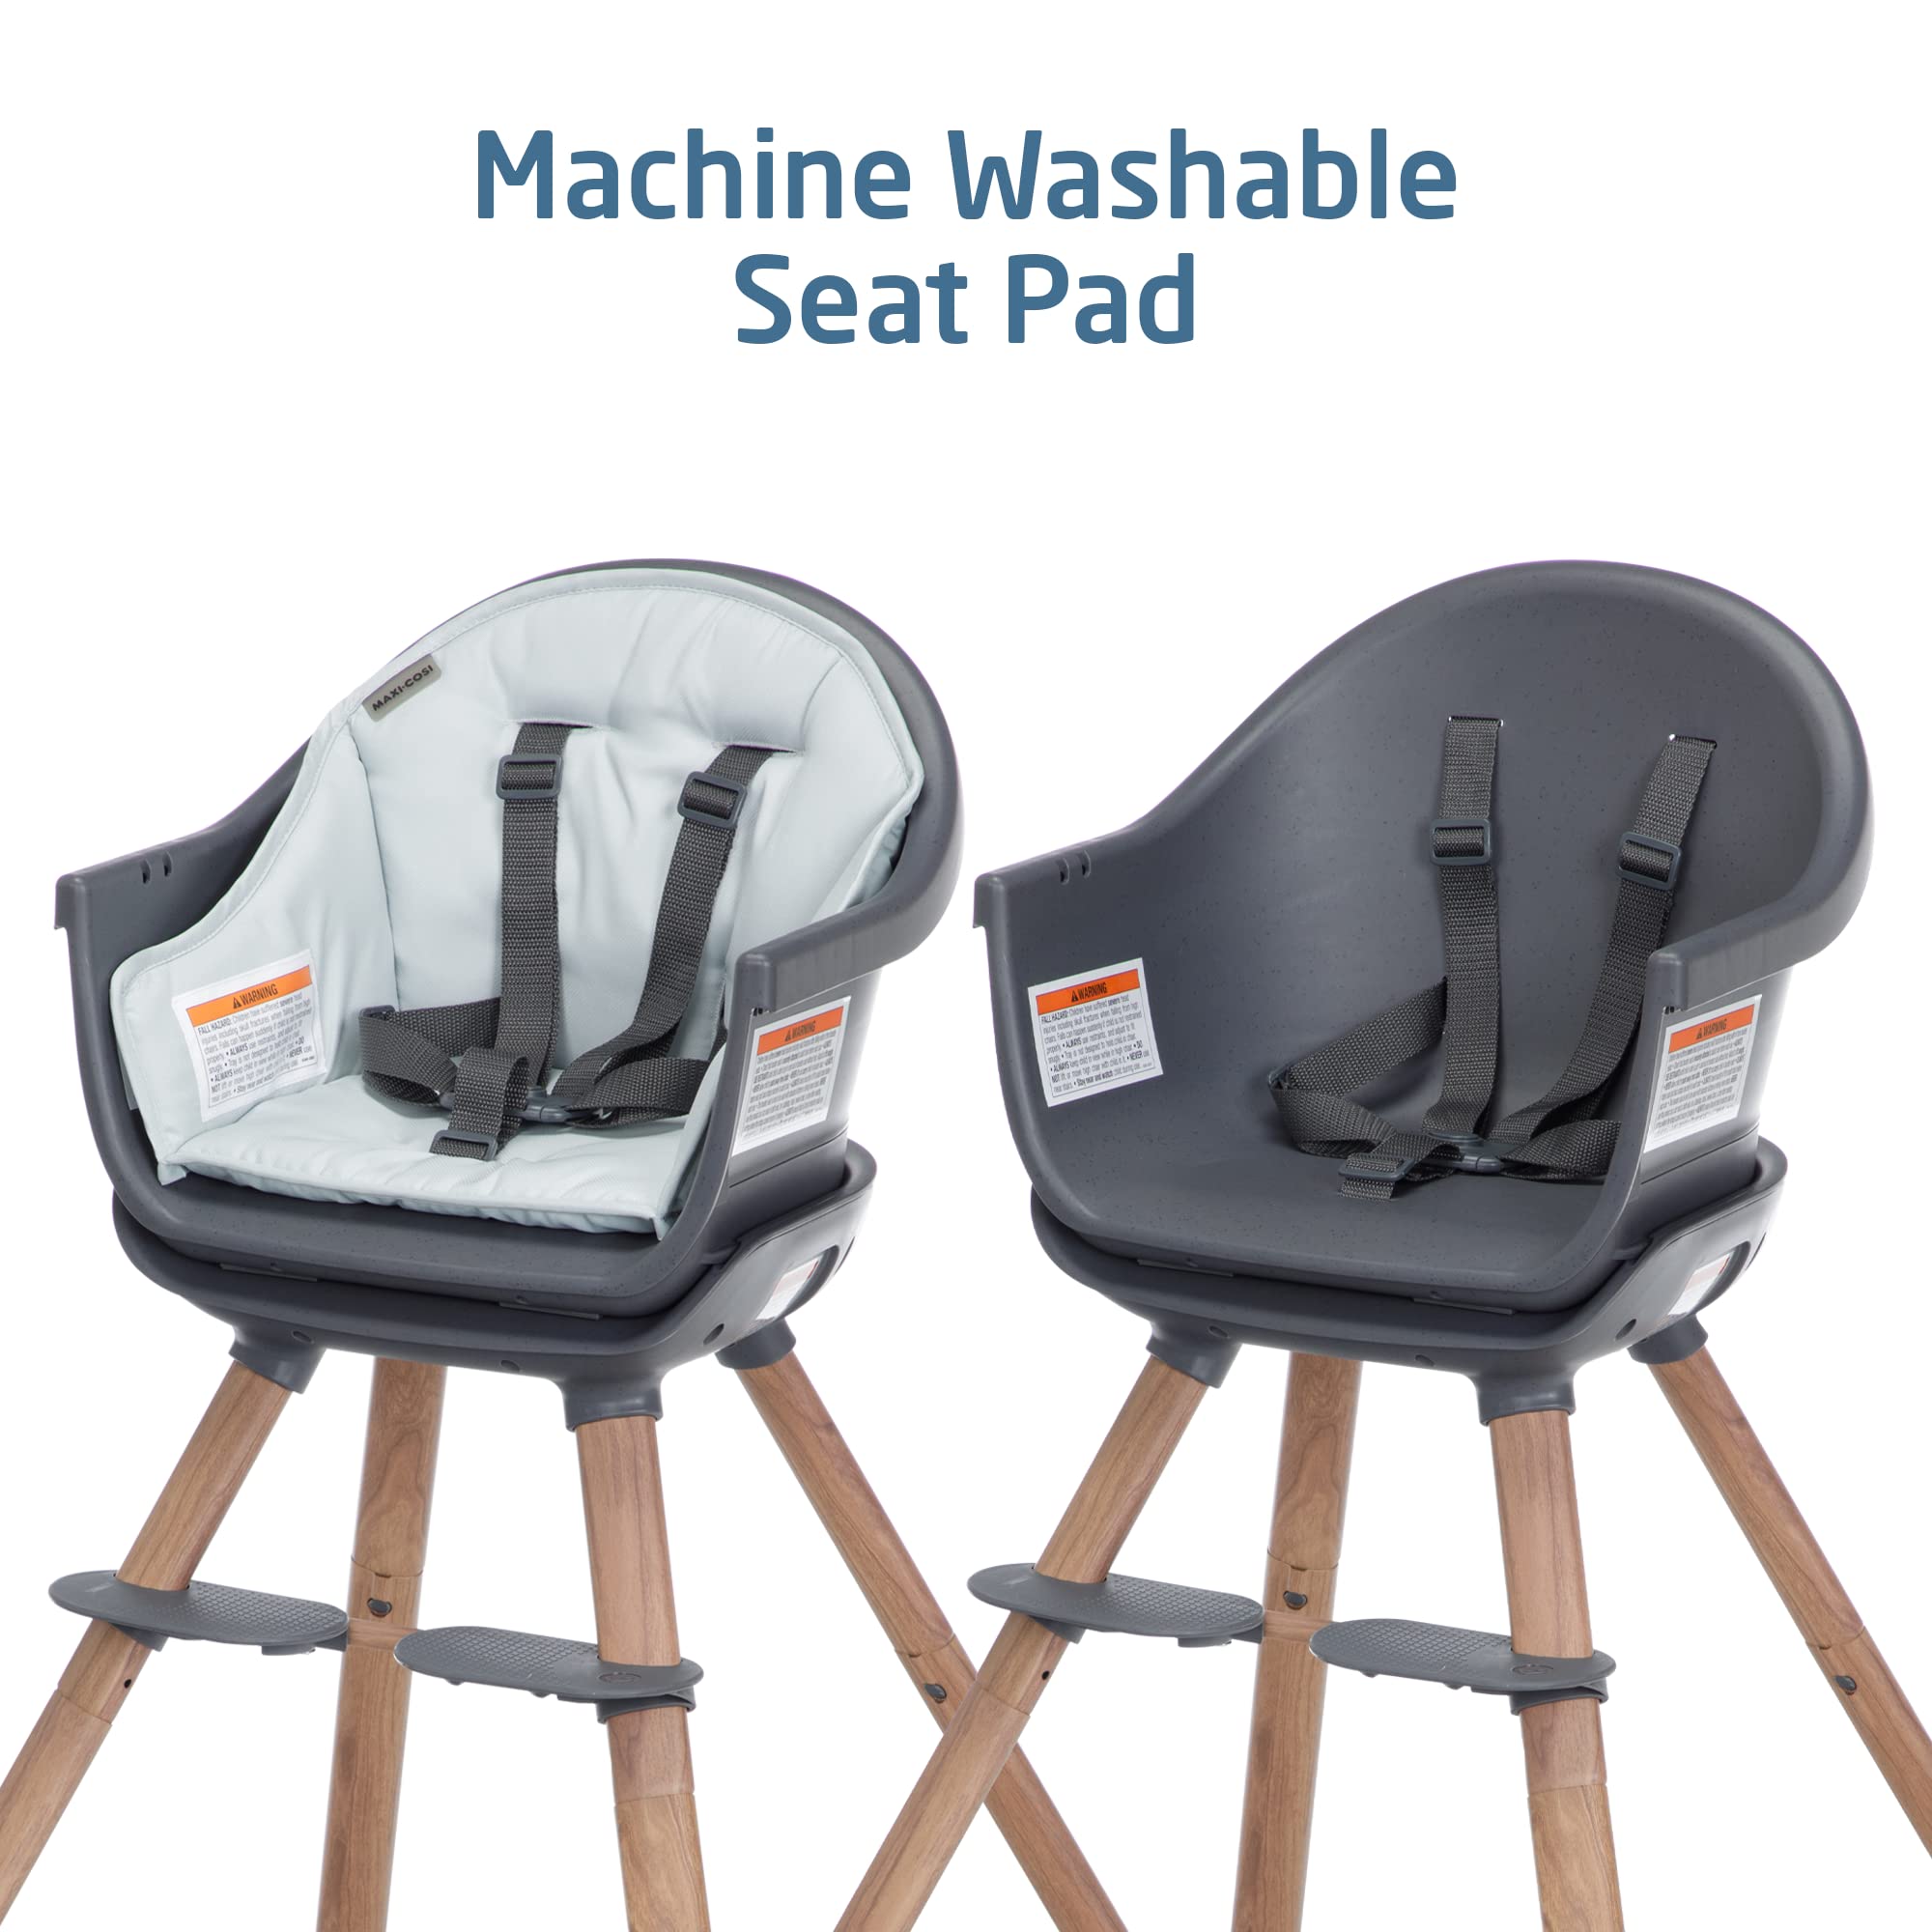 Maxi-Cosi Moa 8-in-1 Highchair, Machine Washable, Compact, Lightweight Design, Essential Graphite